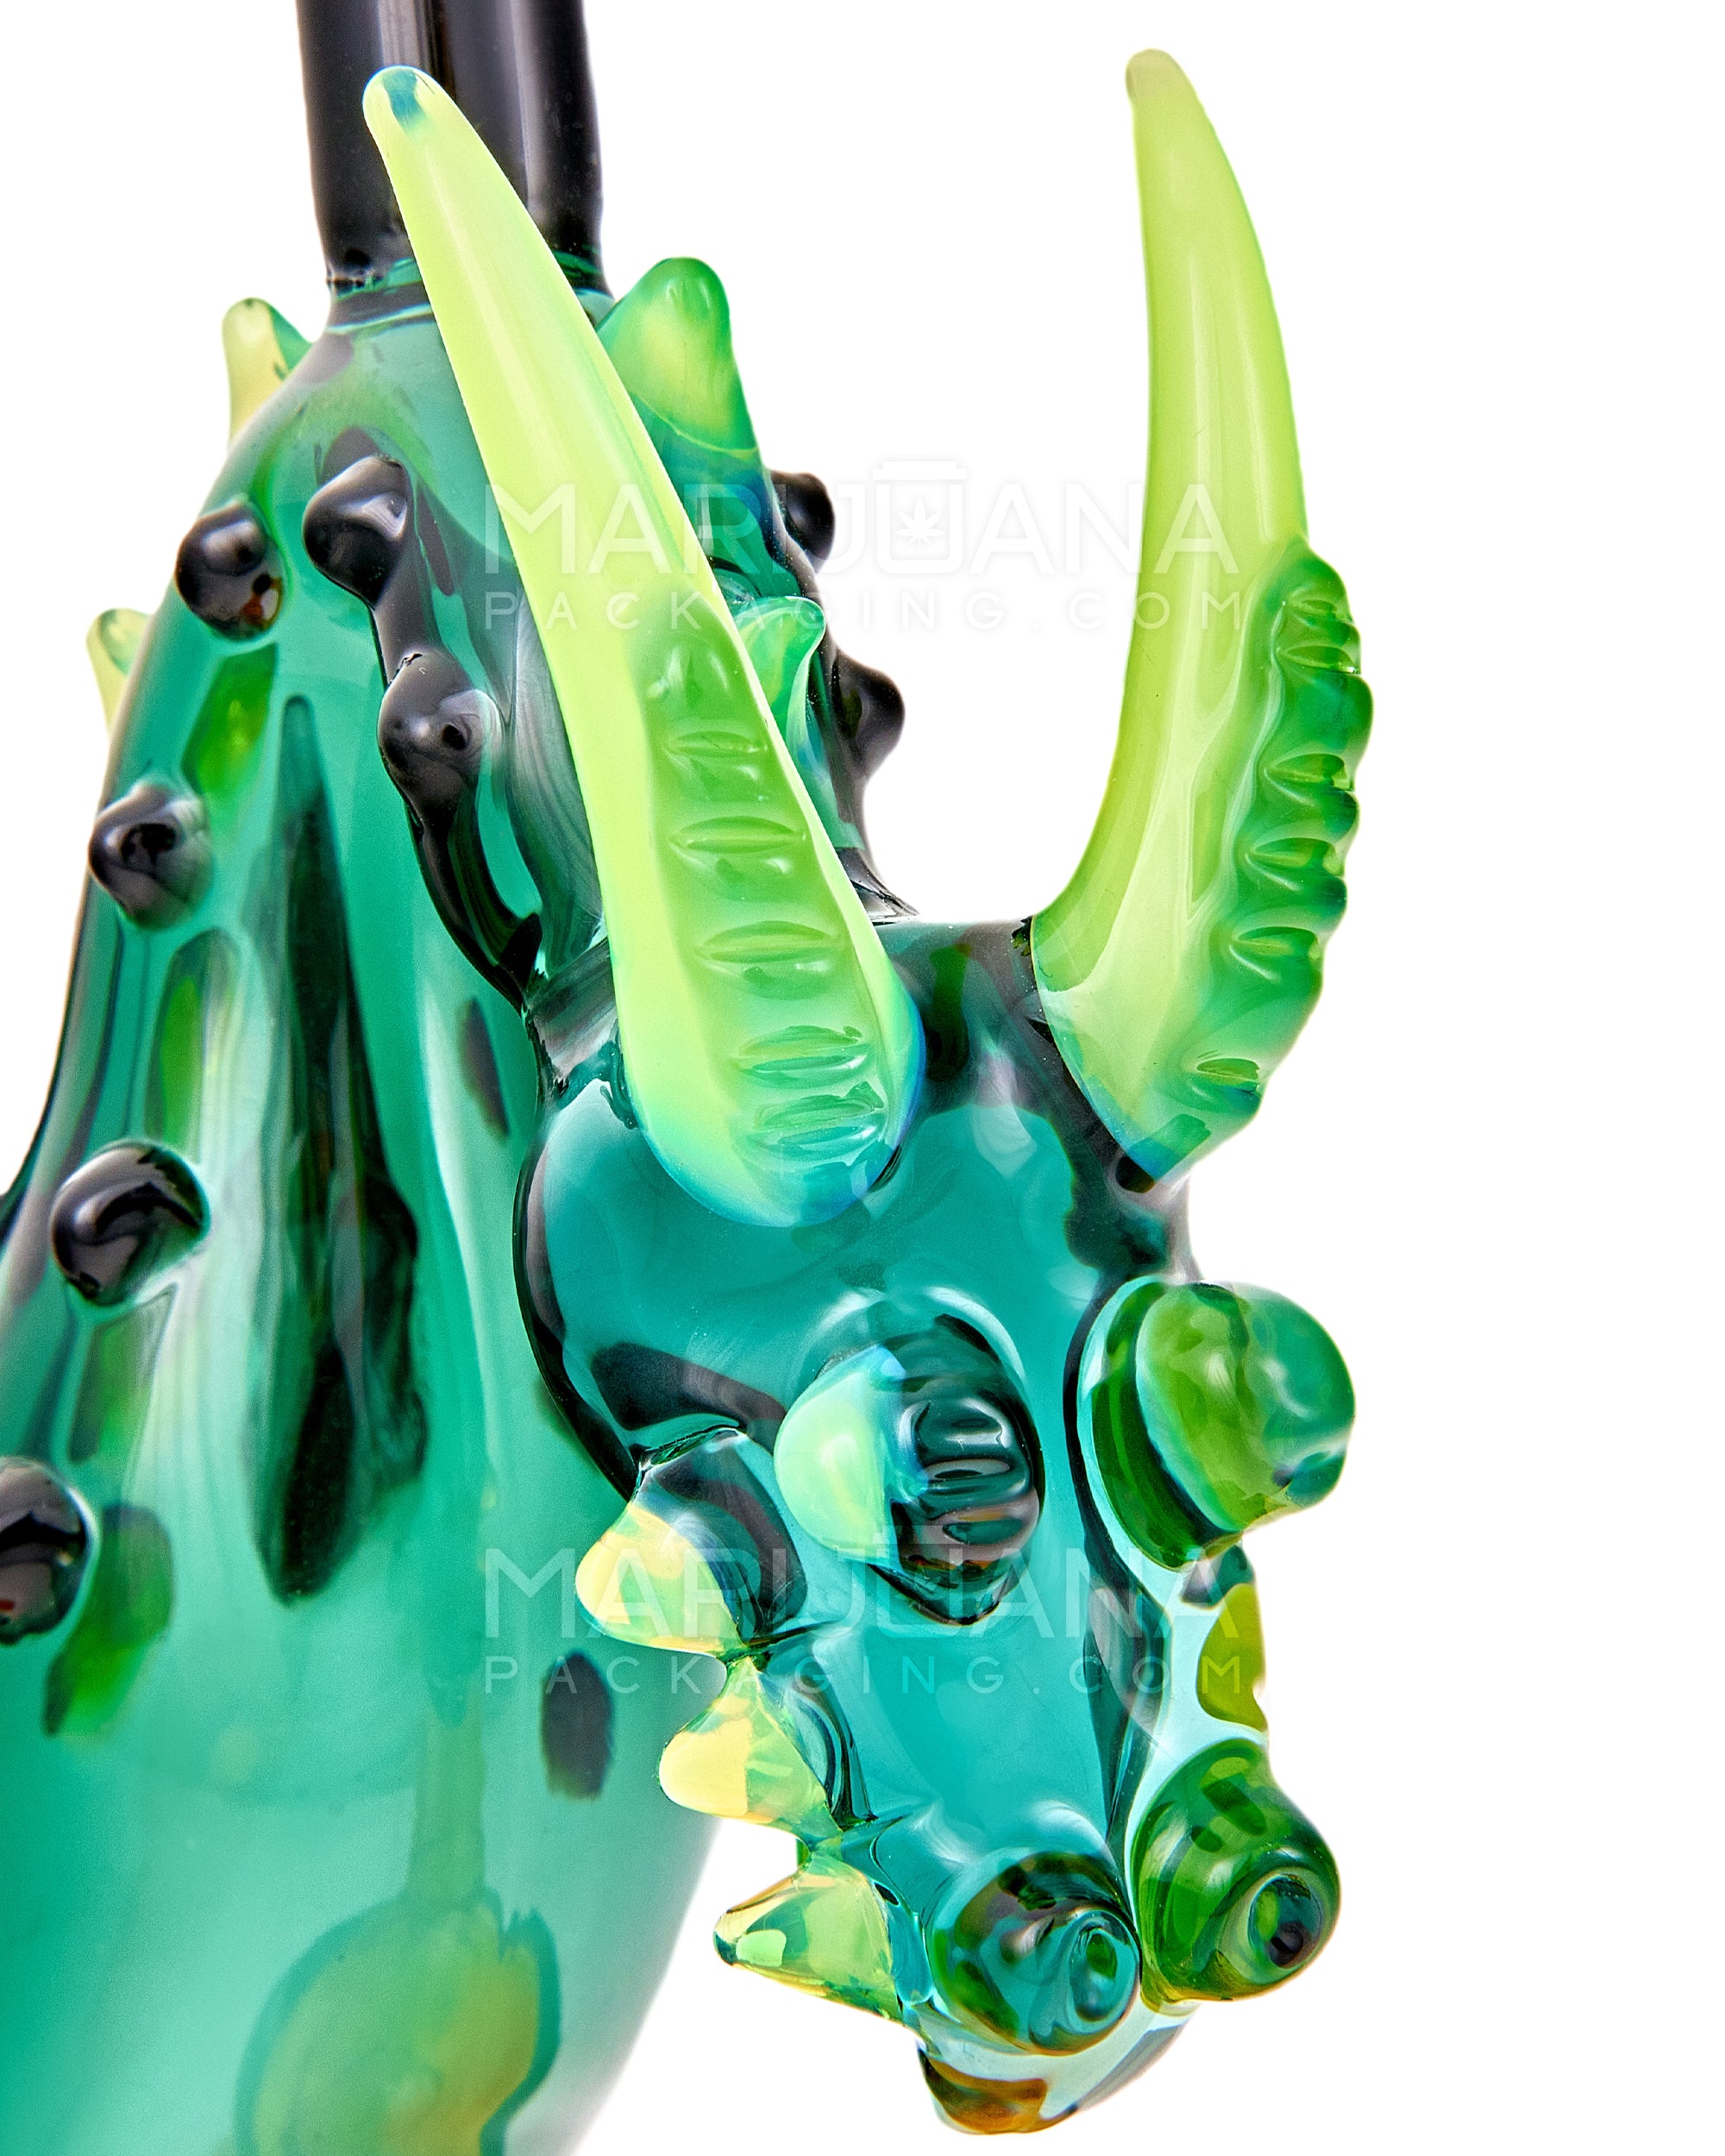 Heady | USA Glass Winged & Horned Glass Dragon Water Pipe w/ Multi Knockers | 7.5in Tall - 14mm Bowl - Teal & Amber - 4